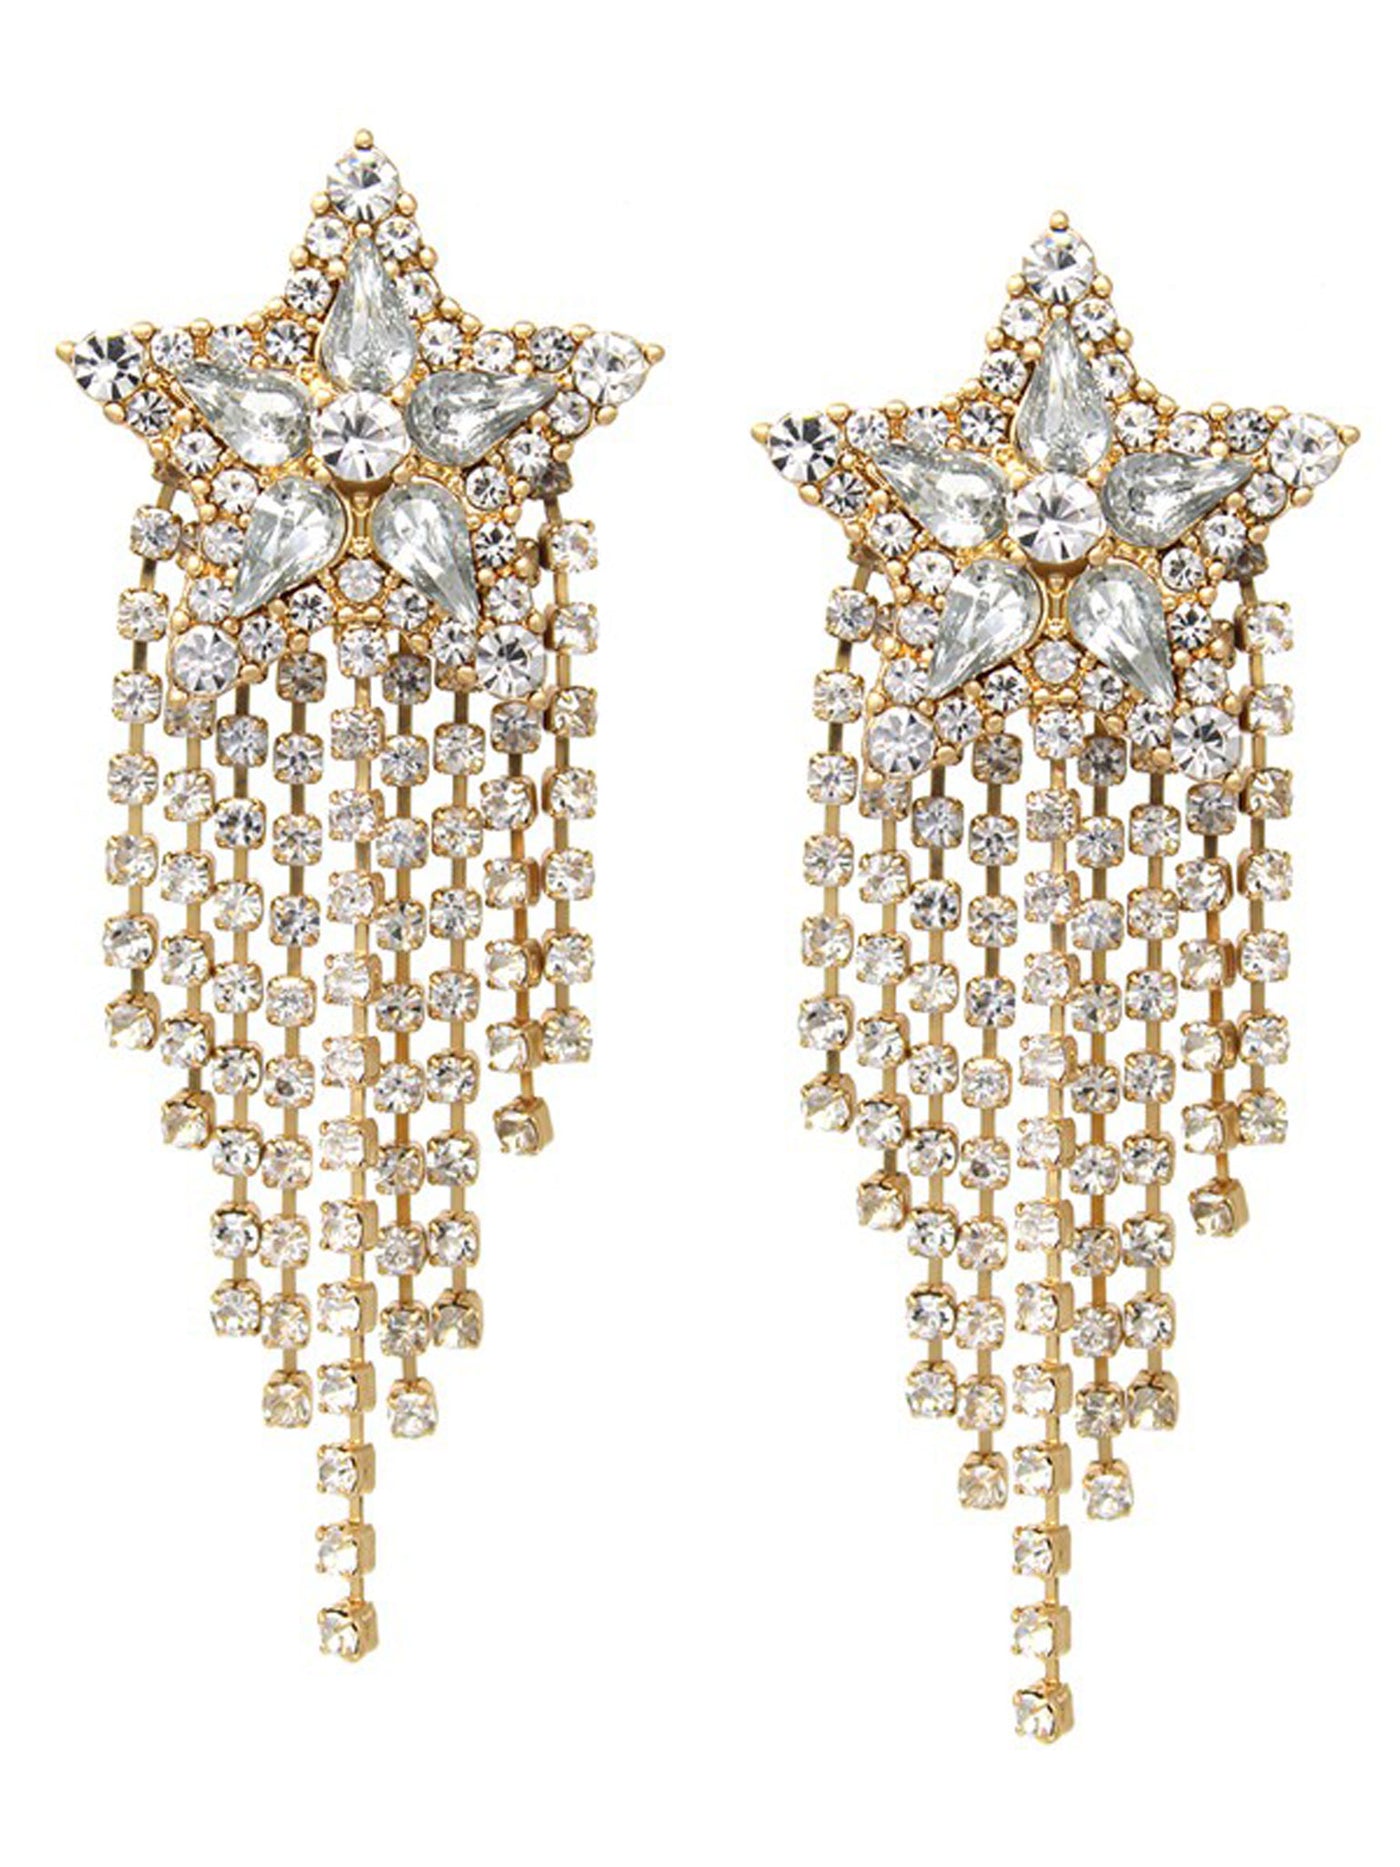 Rhinestone Pave Star with Fringe Drop Earrings